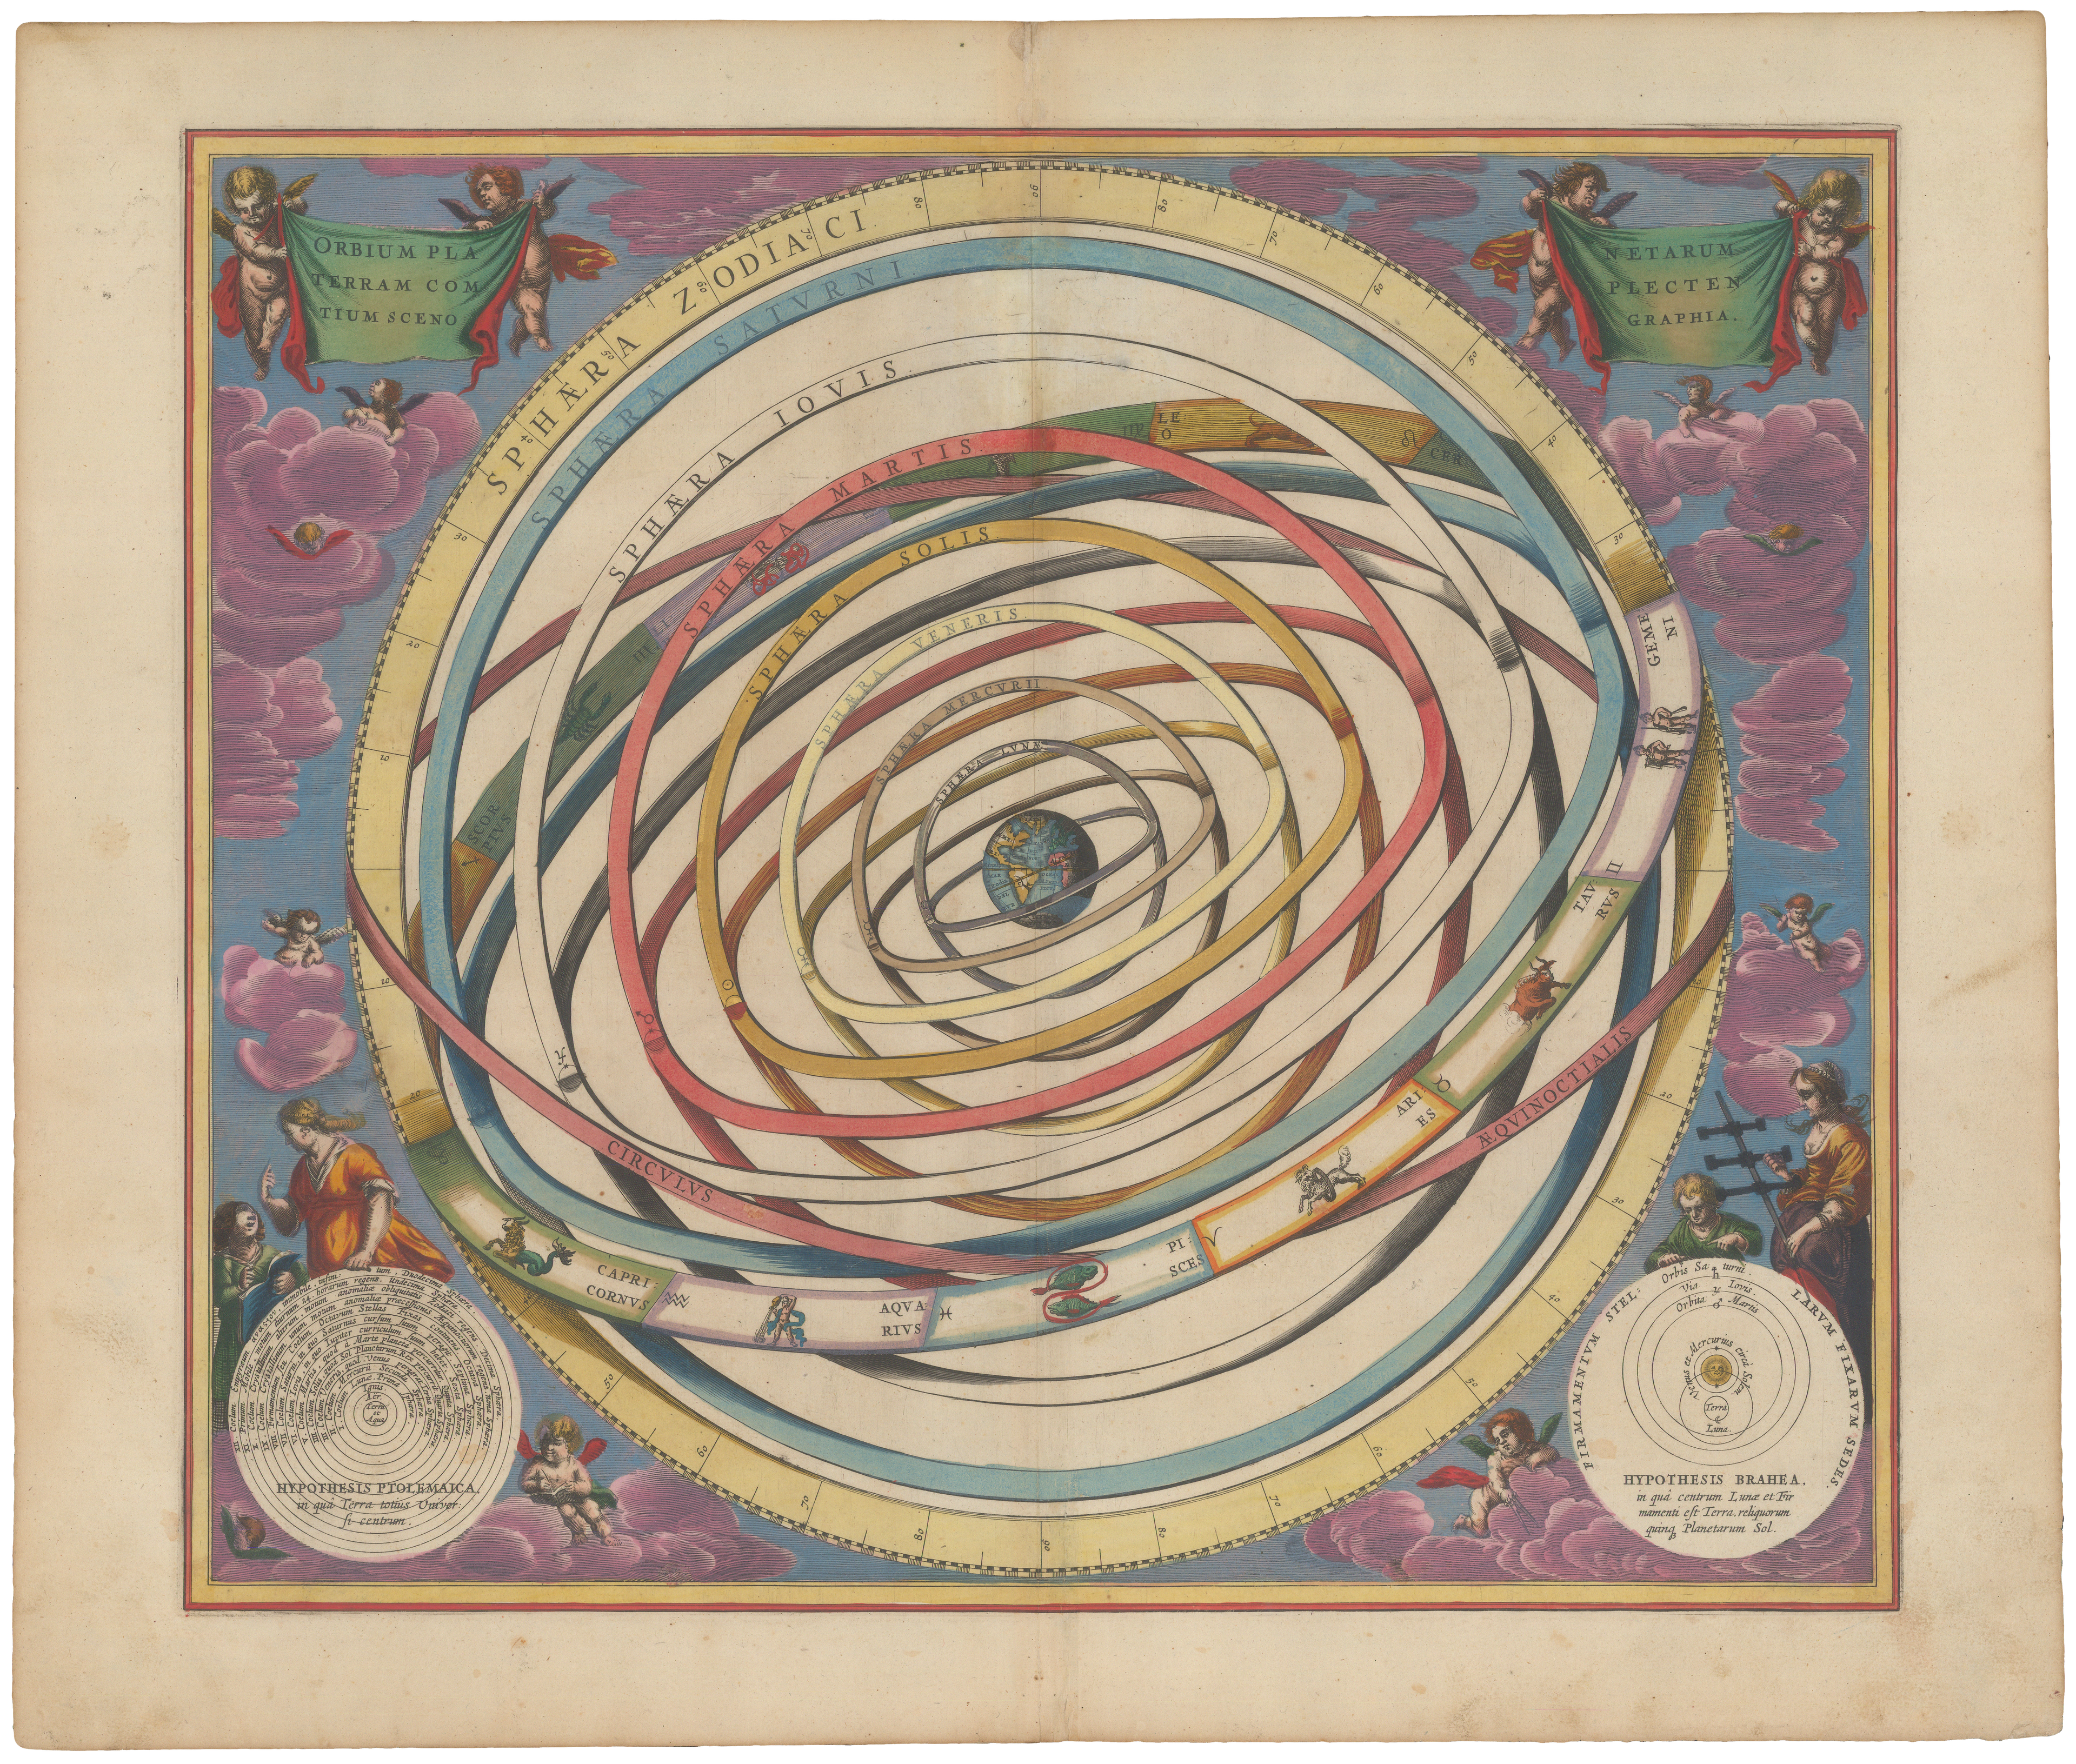 A preview of Andreas Cellarius' star atlas depicting the location of the Earth encircled by the celestial circles.